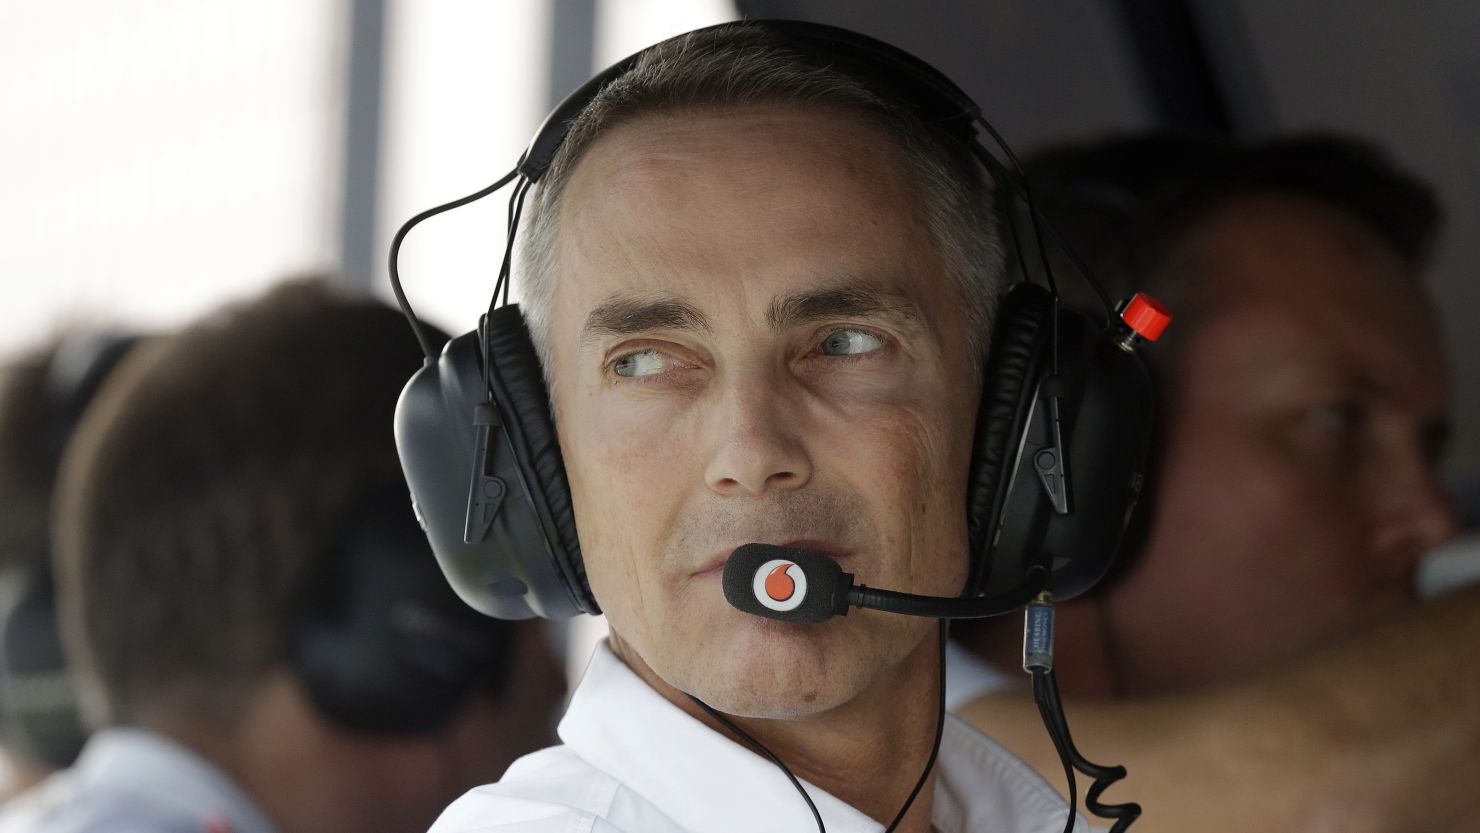 Martin Whitmarsh has failed to guide McLaren to a world championship title  since becoming team principal in 2009.